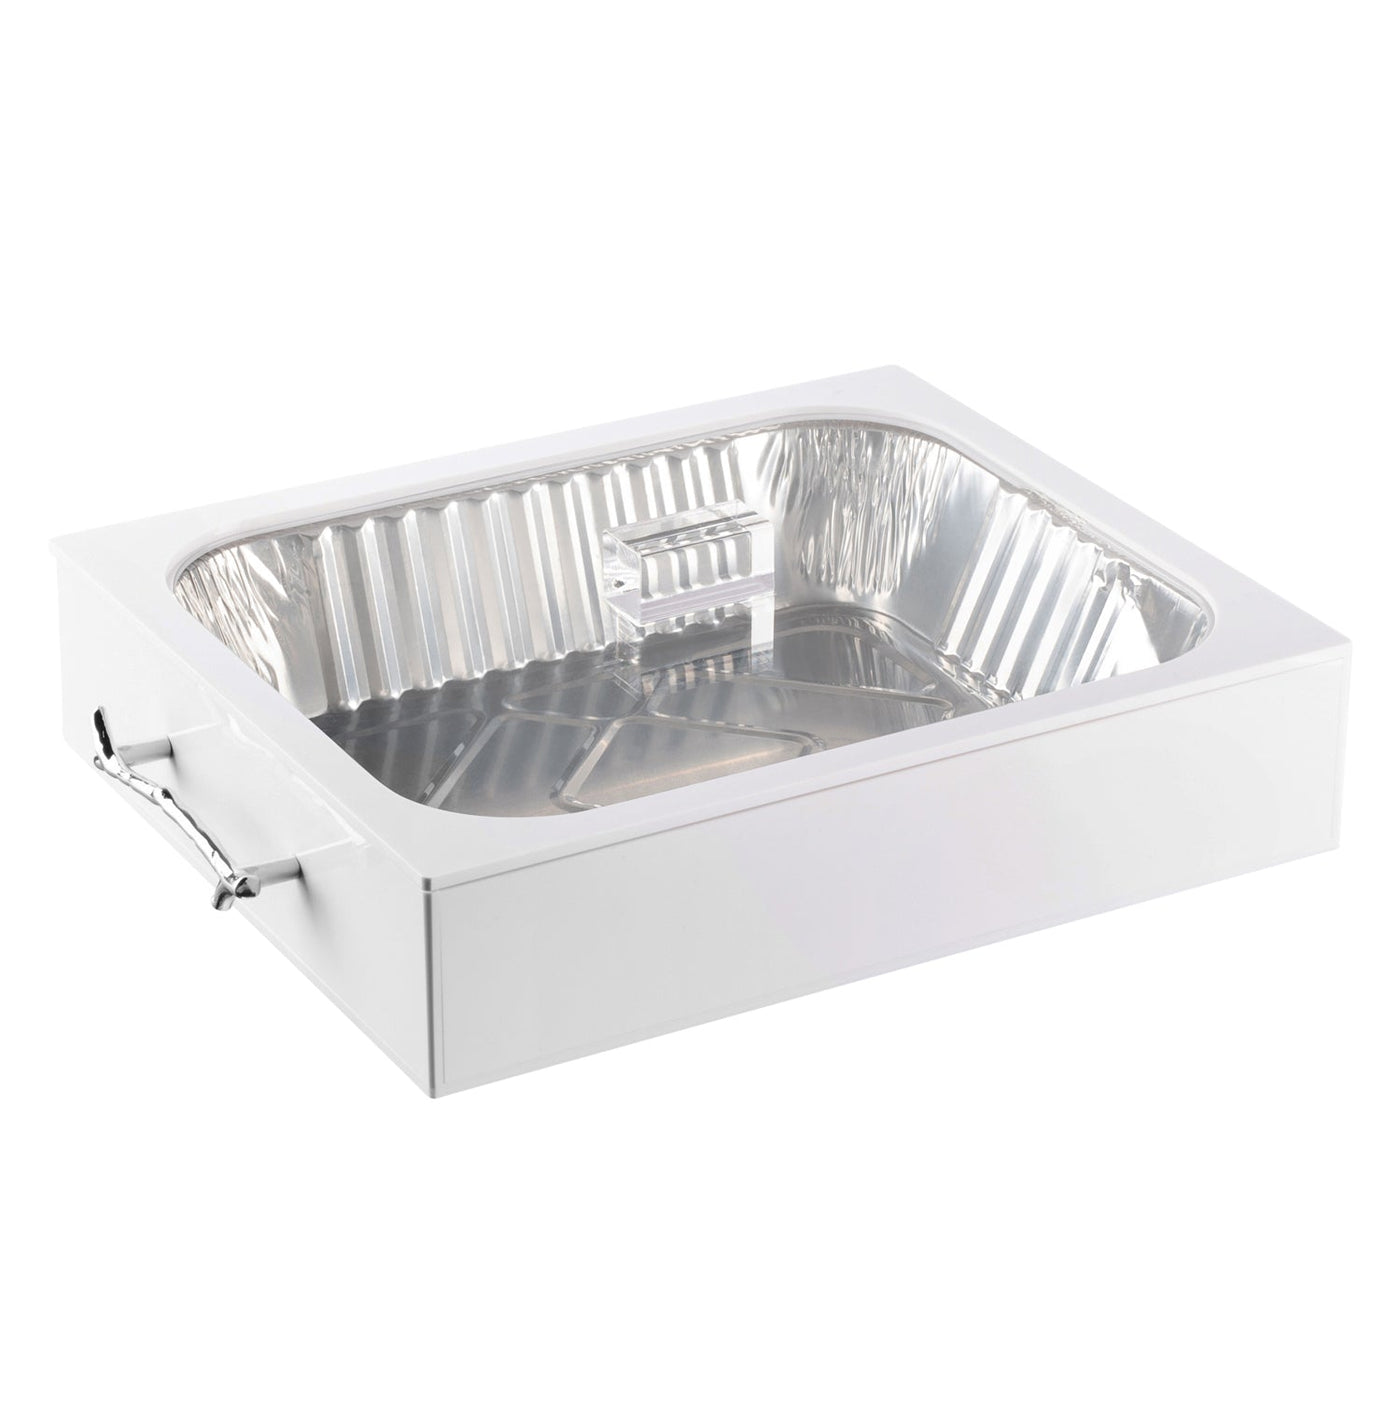 8x8 Silver and White Pan Holder – pompomz